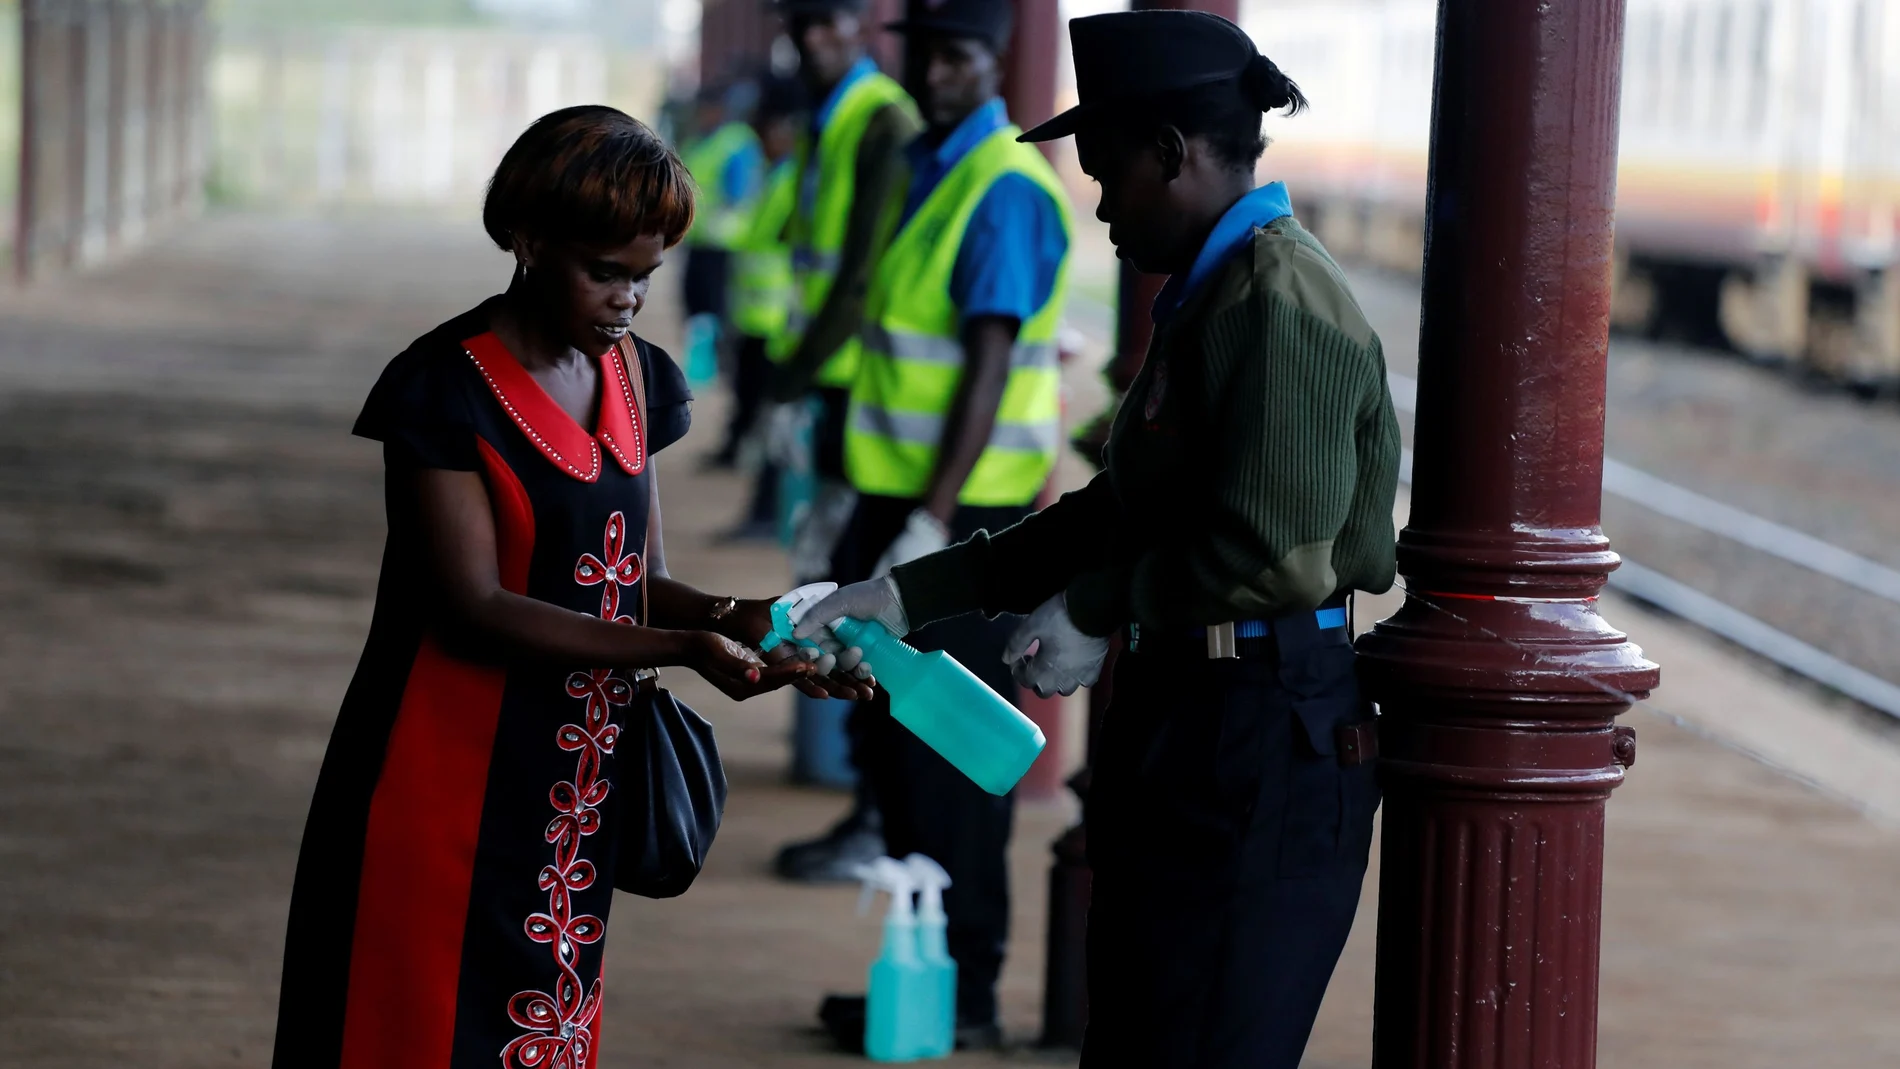 A security guard uses a sprayer to sanitise a commuter hands before she boards a train to prevent the spread of coronavirus disease (COVID-19), at the main railway station in Nairobi